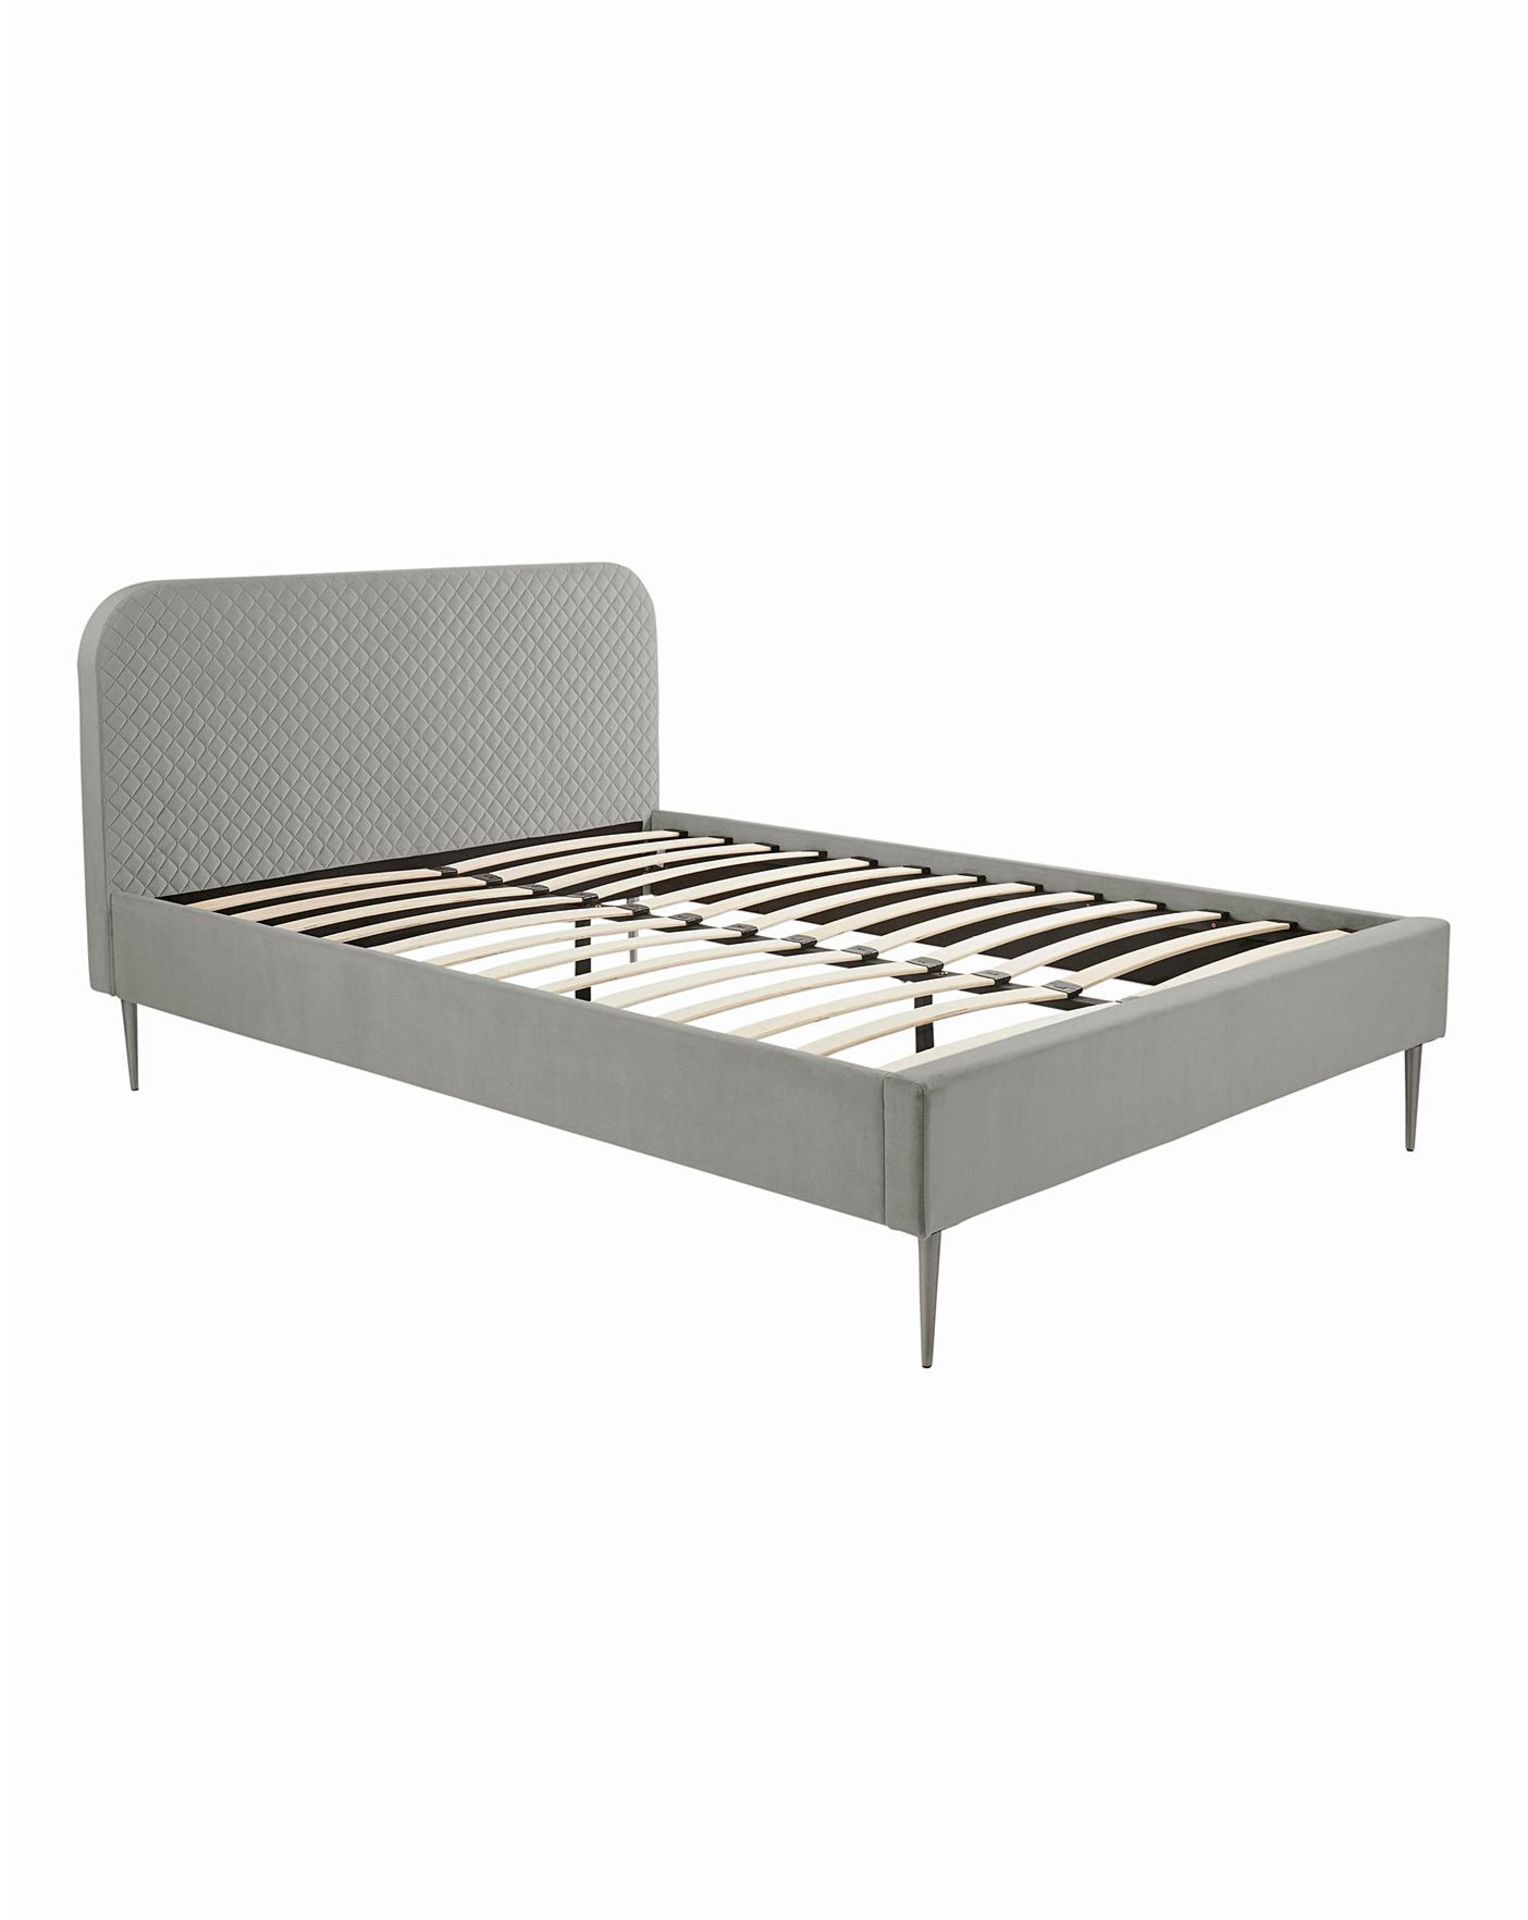 BRAND NEW ARDEN Quilted KING Bed Frame. PEWTER. RRP £489 EACH. The Arden Quilted Bed is the - Bild 2 aus 2